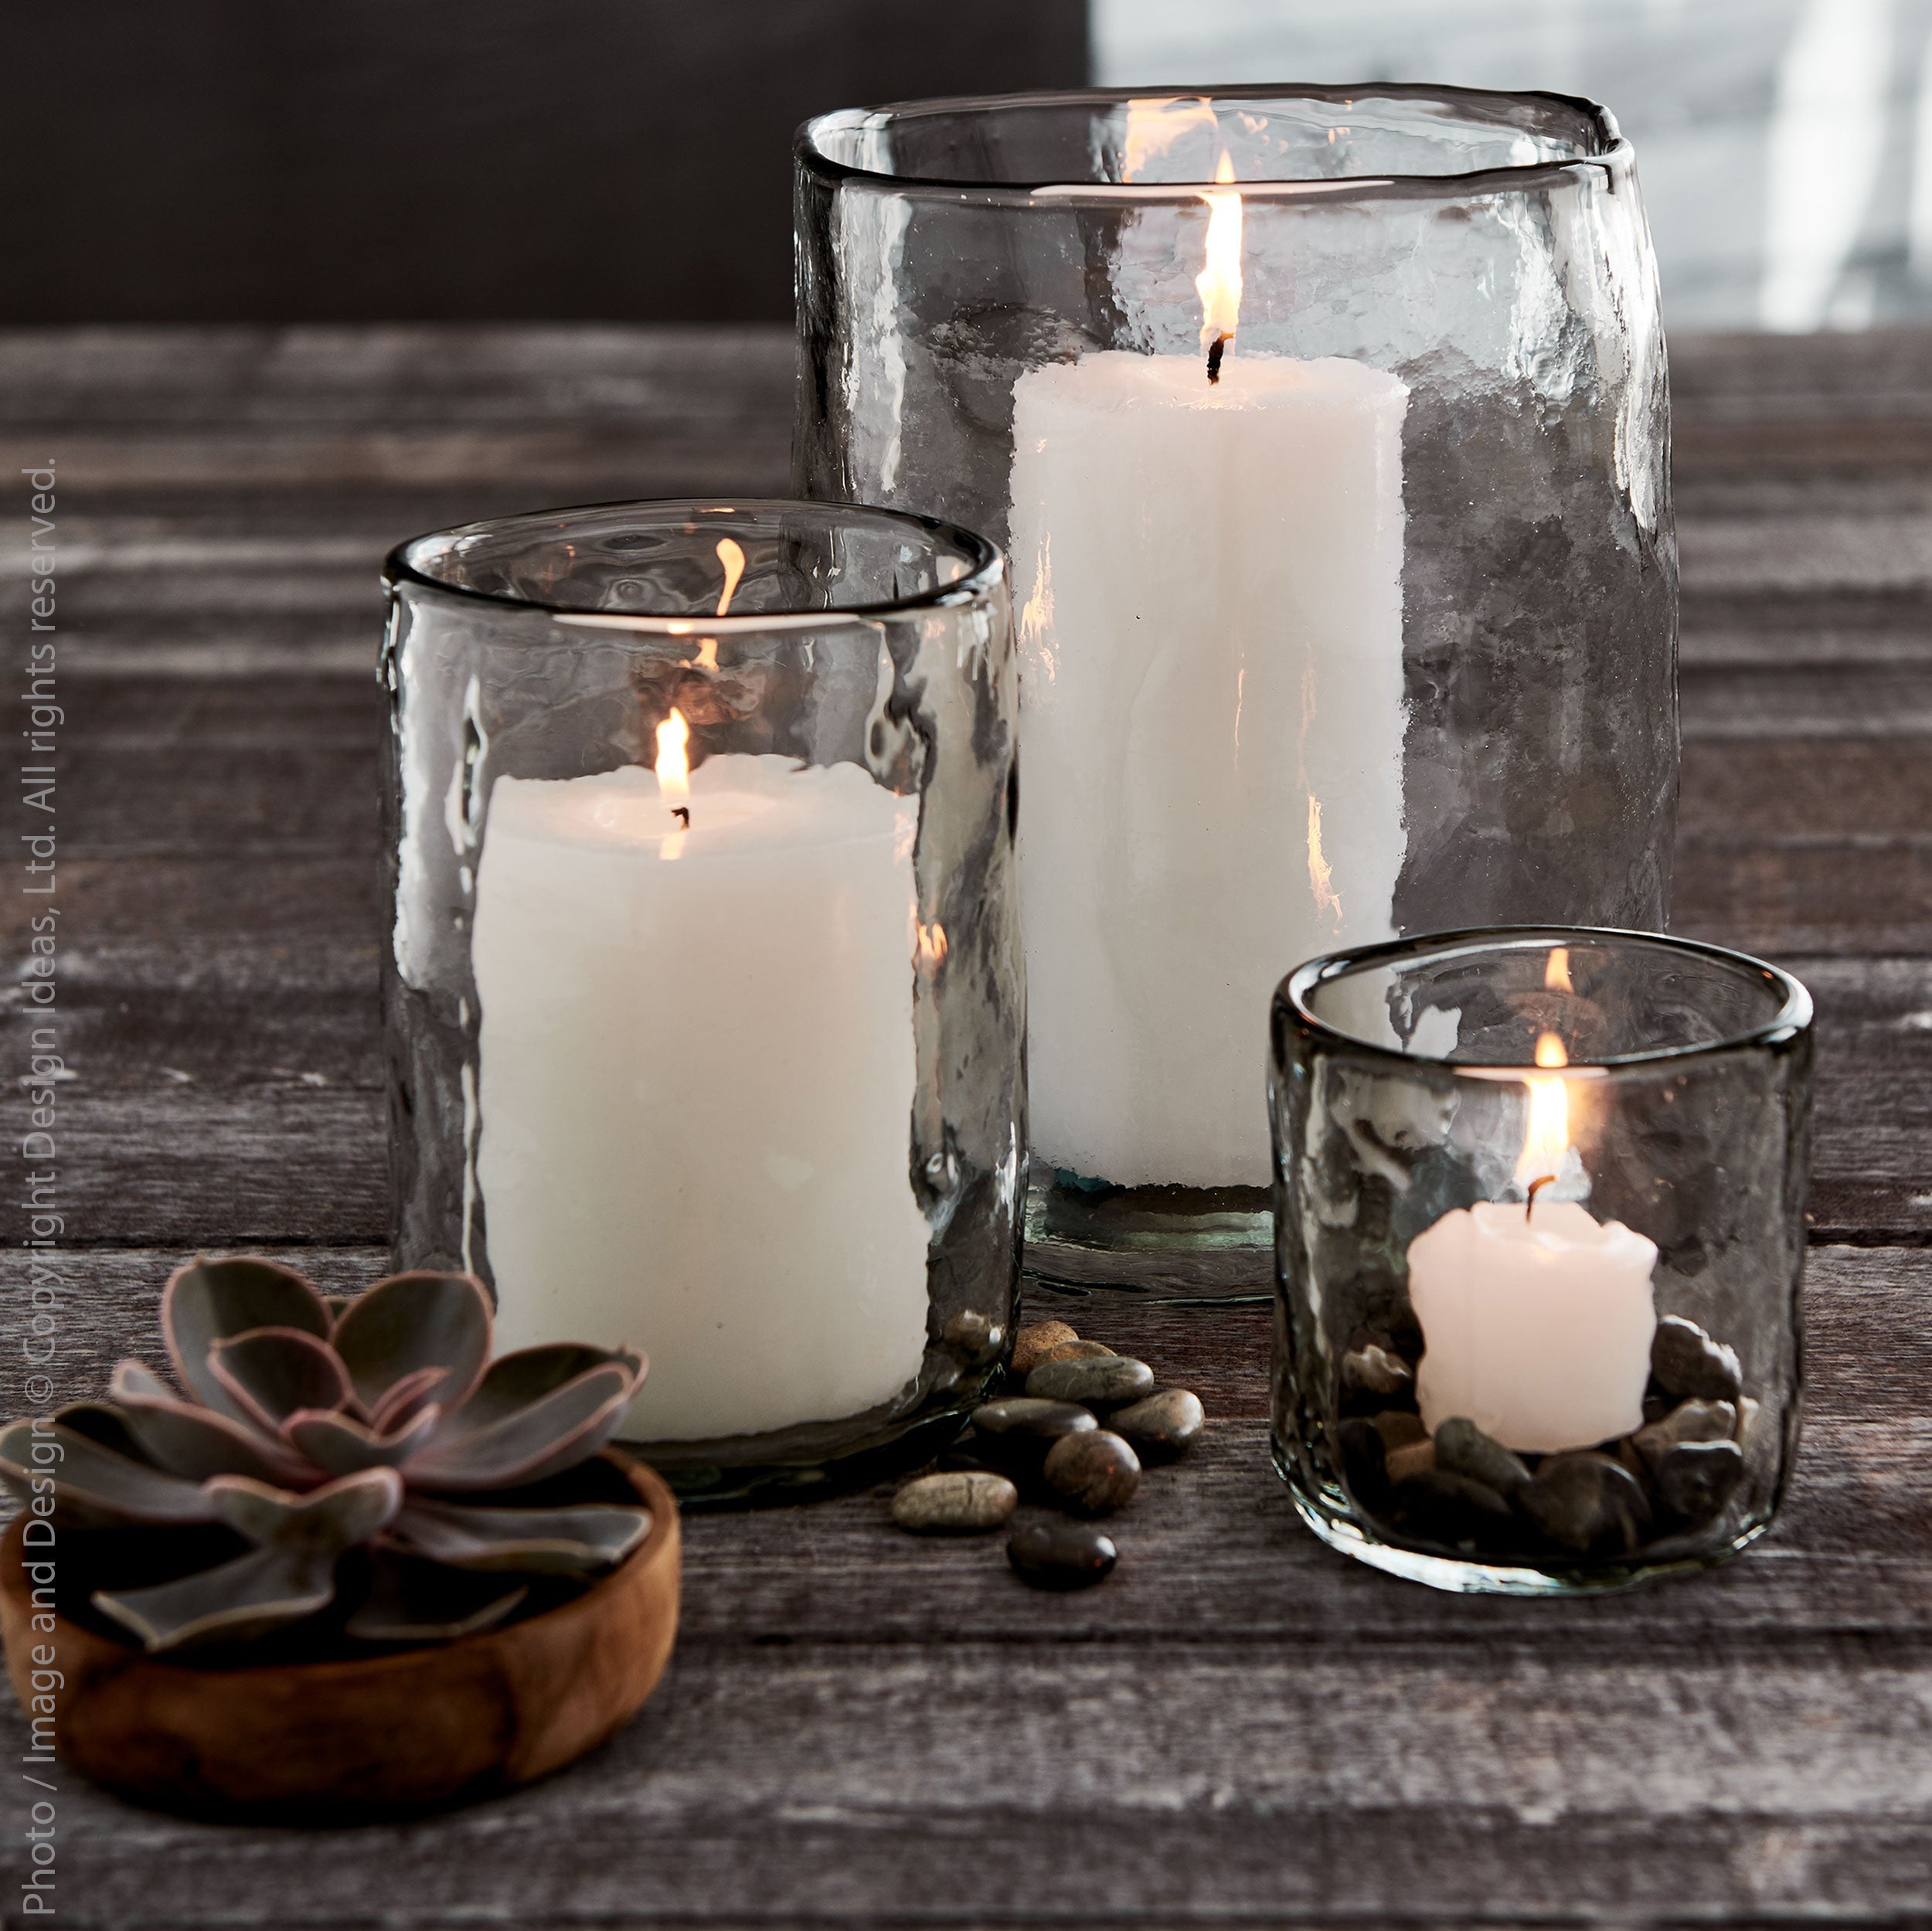 Wabisabi Glass Votive Candle Holder white color | Image 2 | From the Wabisabi Collection | Exquisitely crafted with natural glass for long lasting use | Available in clear color | texxture home